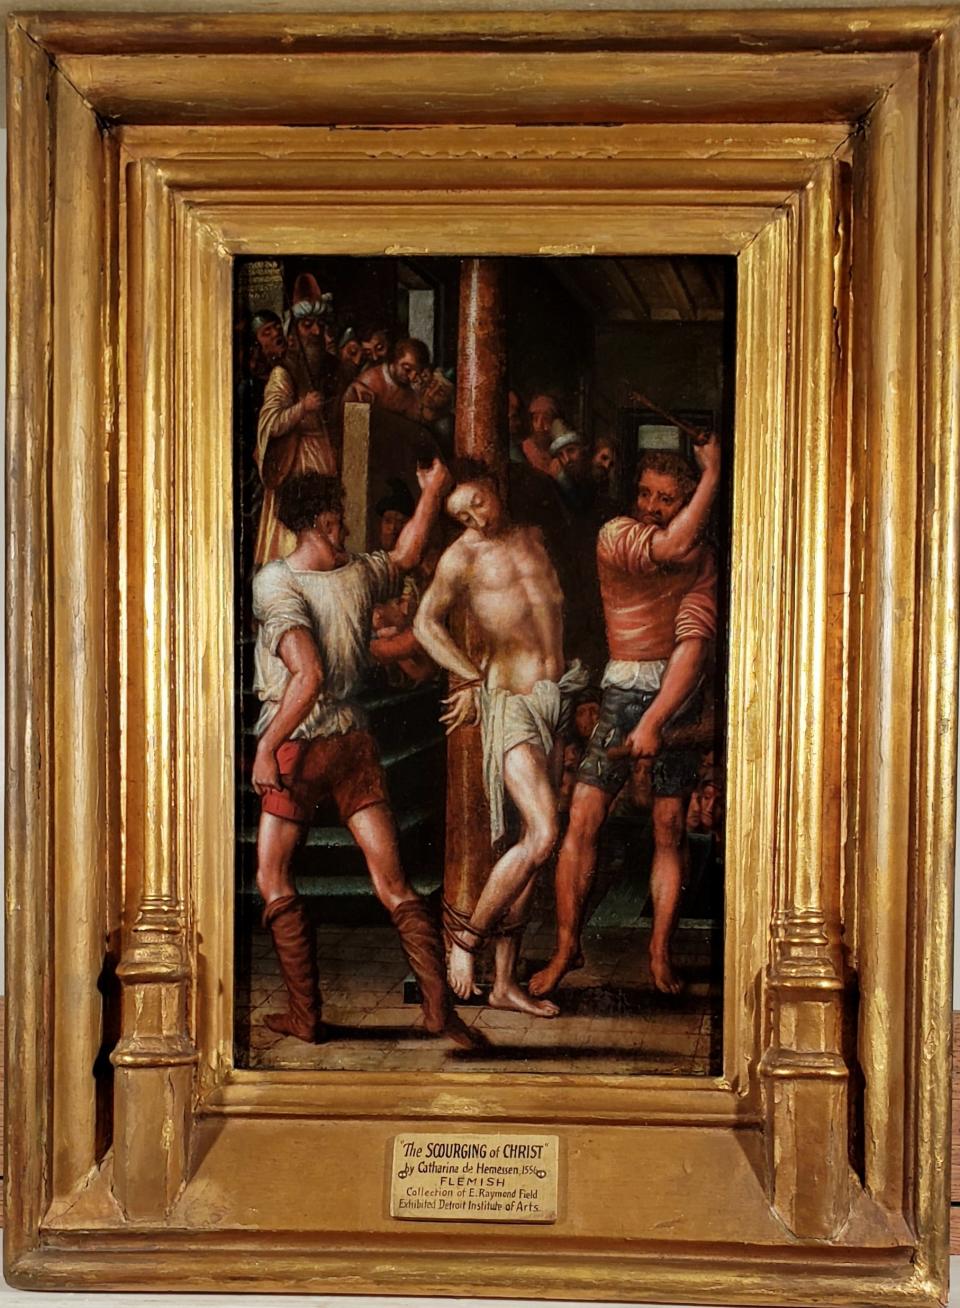 Catharina van Hemessen’s "Scourging of Christ" is on display at the Robert A. Deshon and Karl J. Schlachter Library for Design, Architecture, Art and Planning at the University of Cincinnati until April 30.